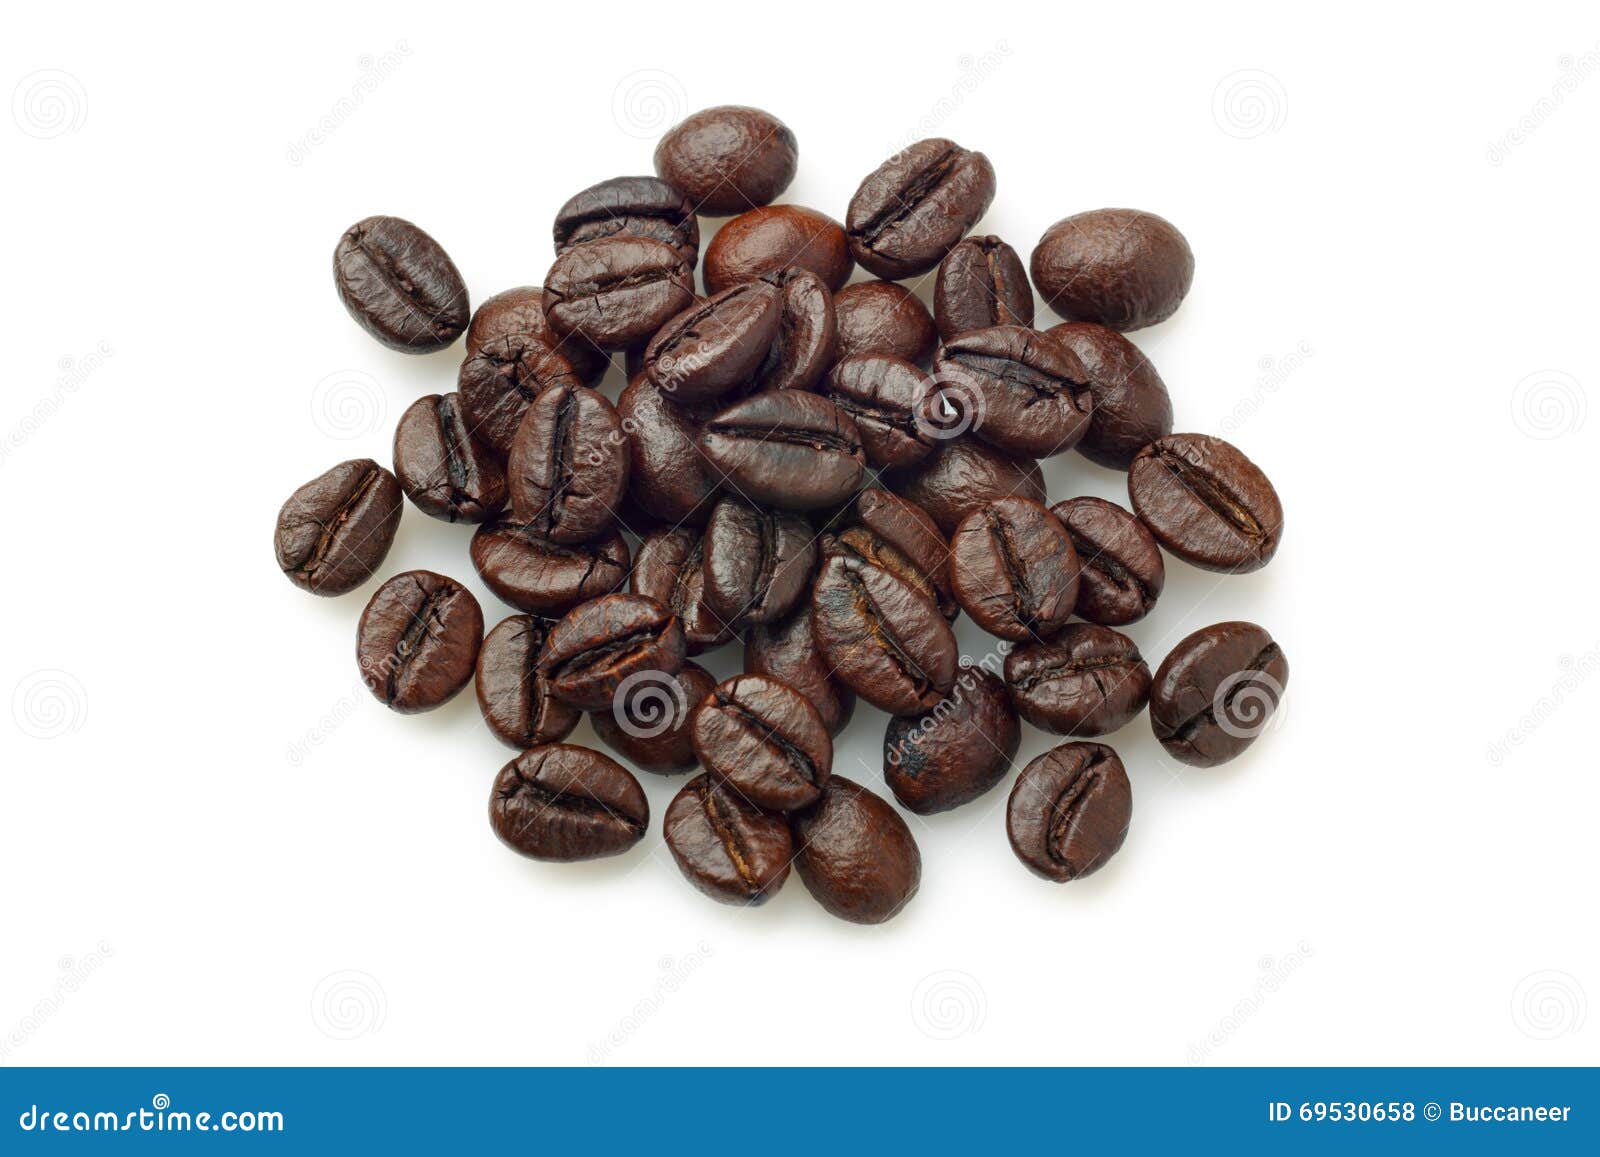 pile of coffee beans (robusta coffee)